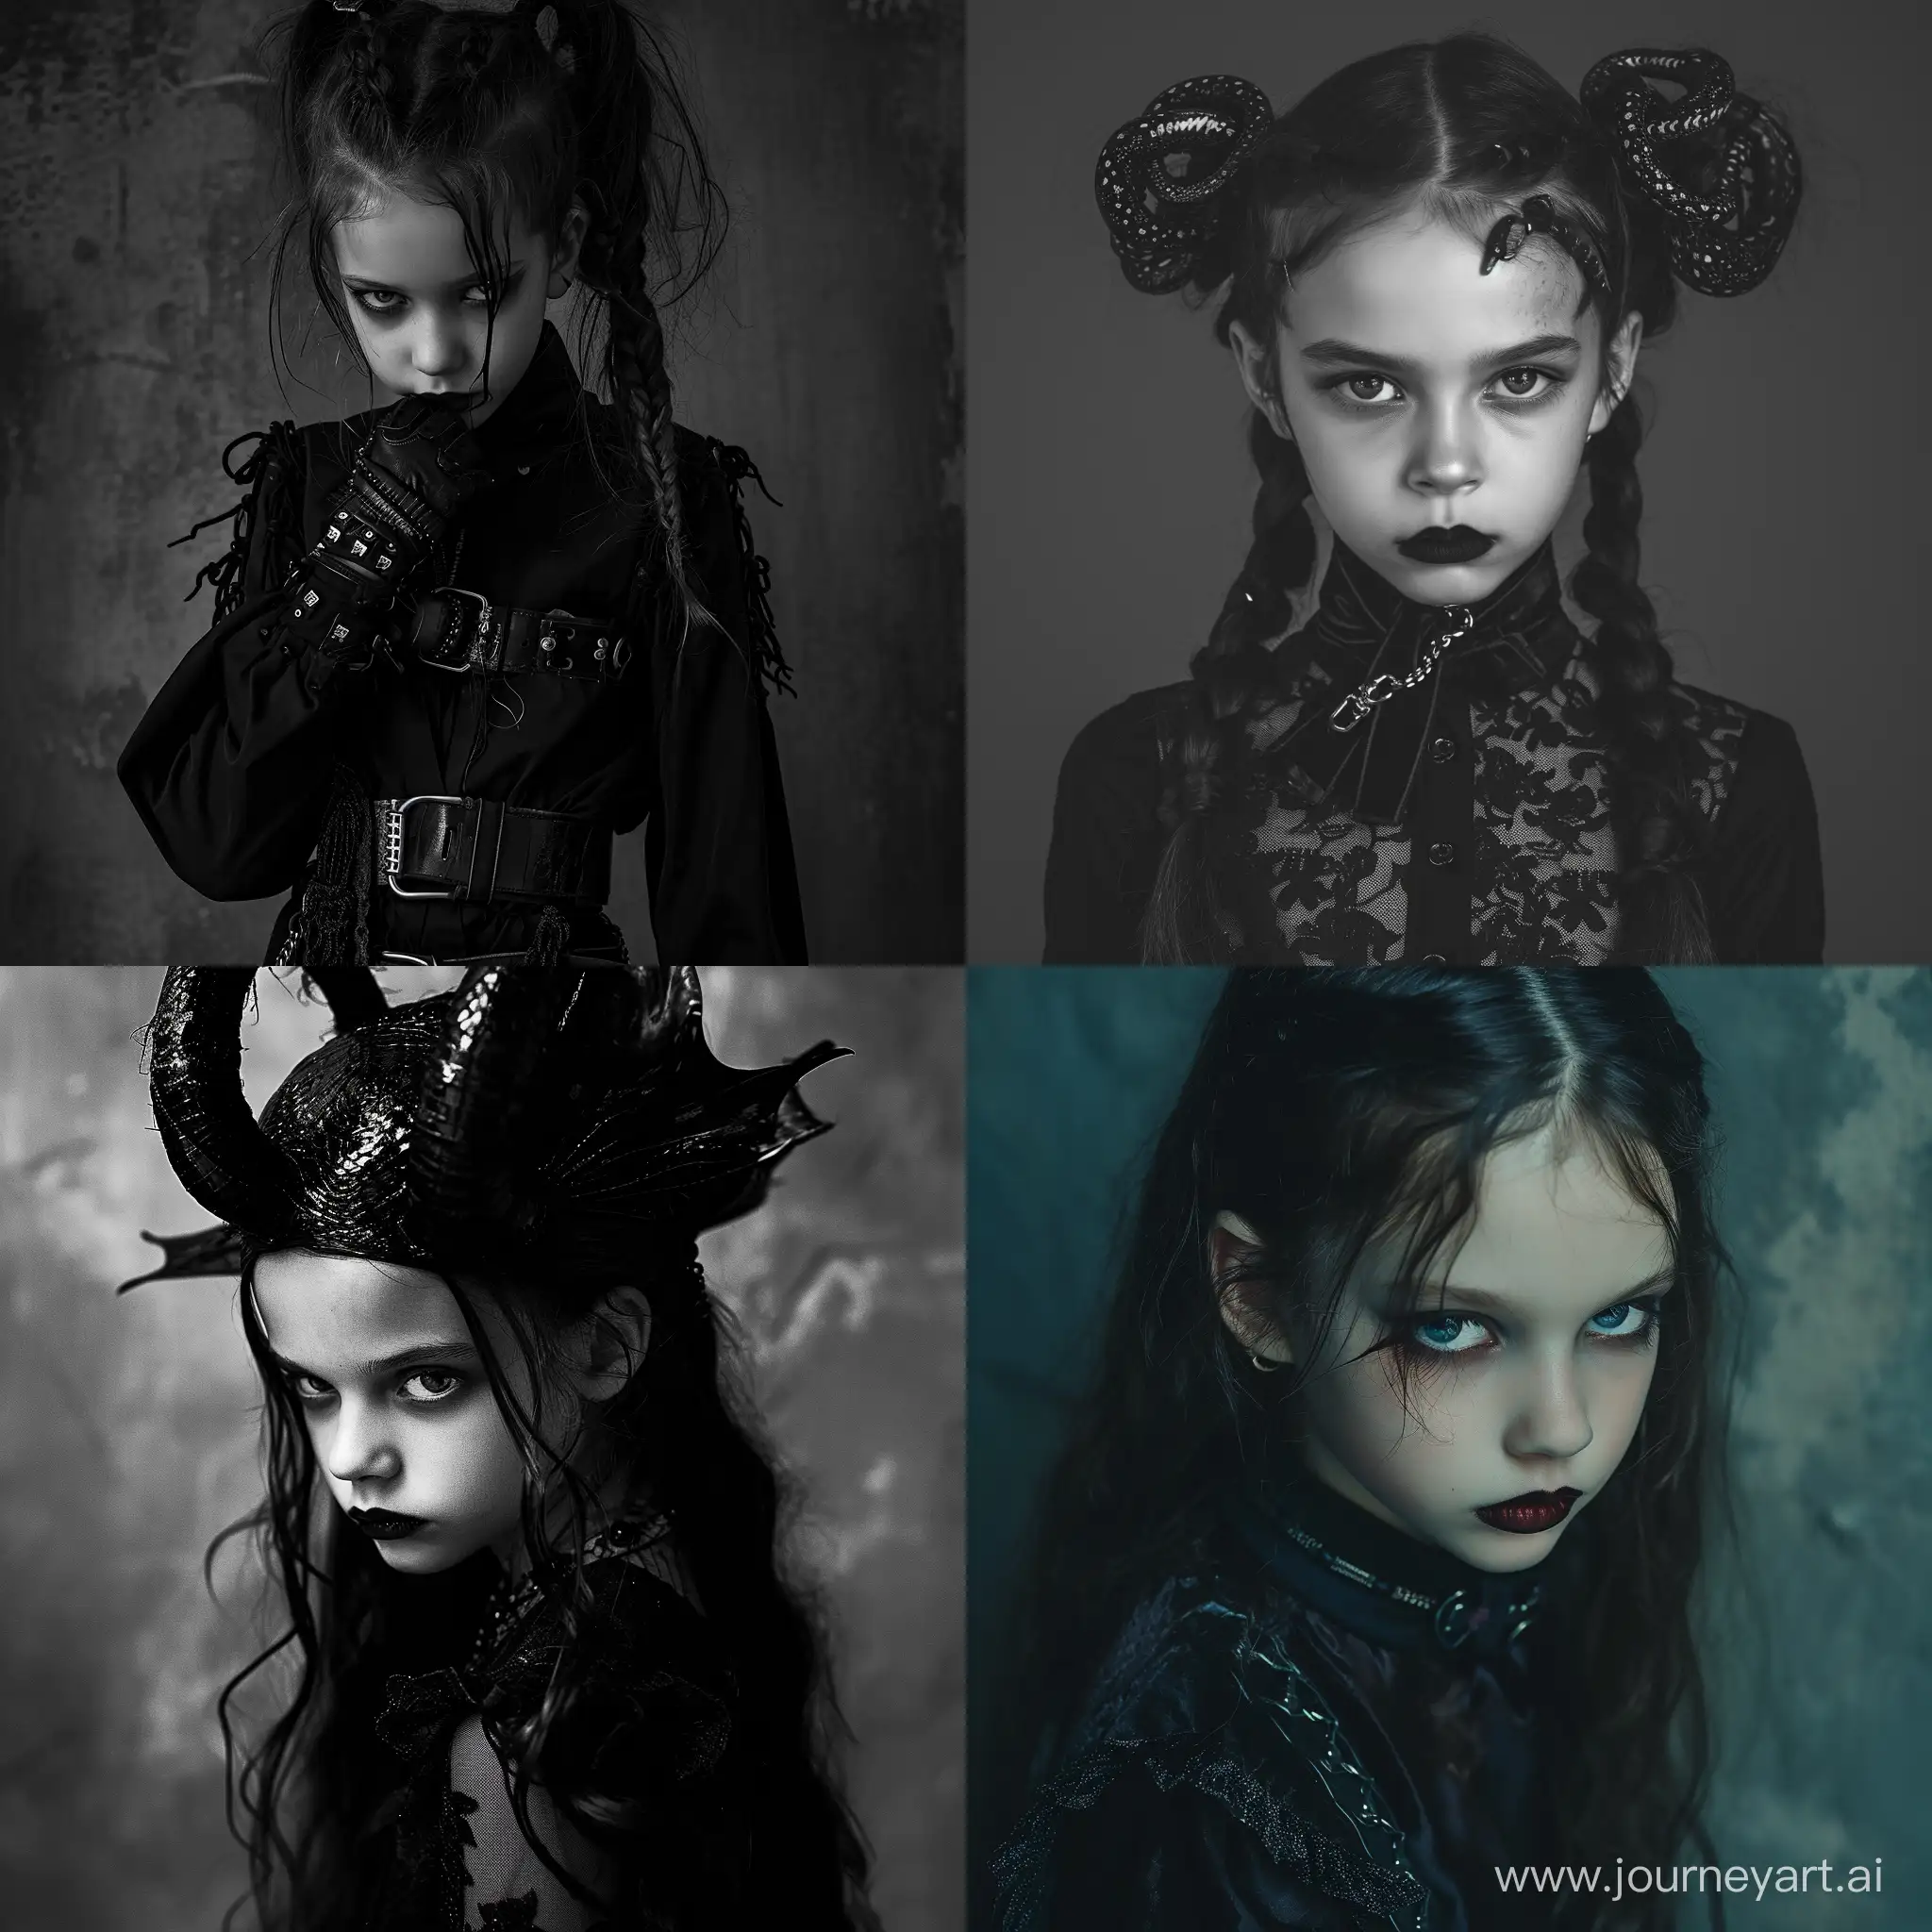 Dark-Glamour-Photoshoot-Edgy-12YearOld-Girl-with-Dystopian-Vibes